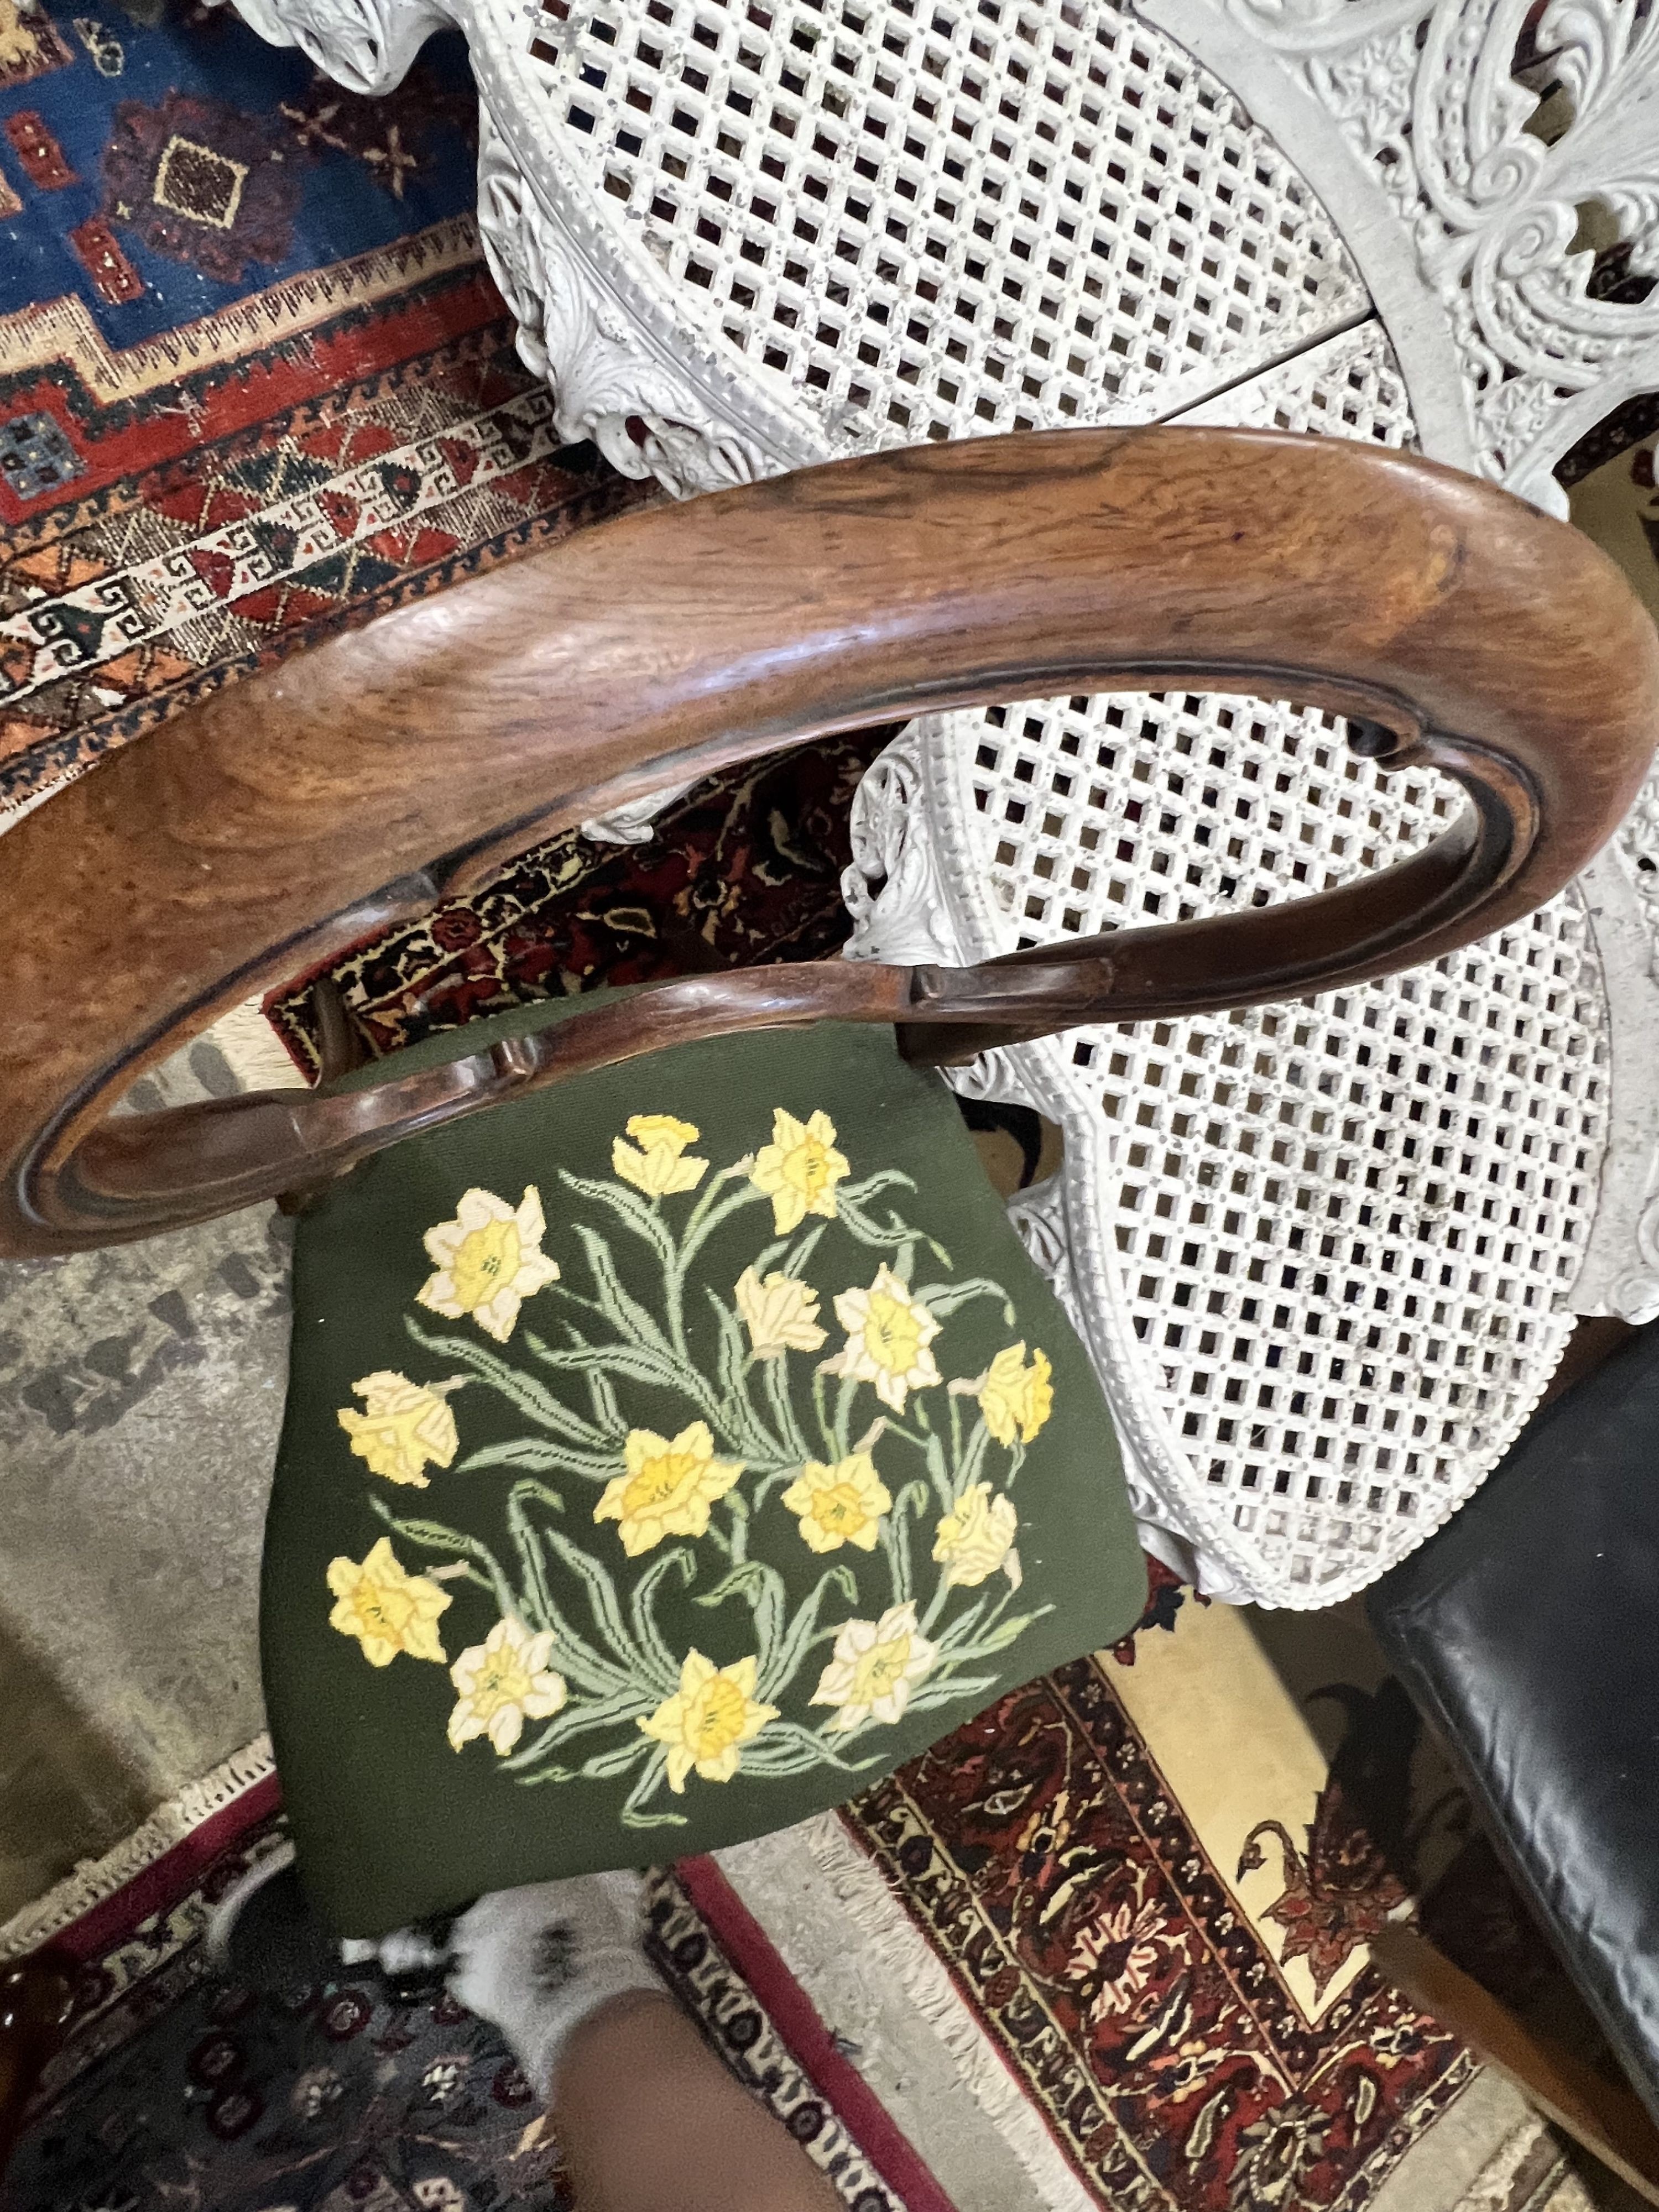 A George III Provincial elm elbow chair, a Victorian nursing chair, and a dining chair